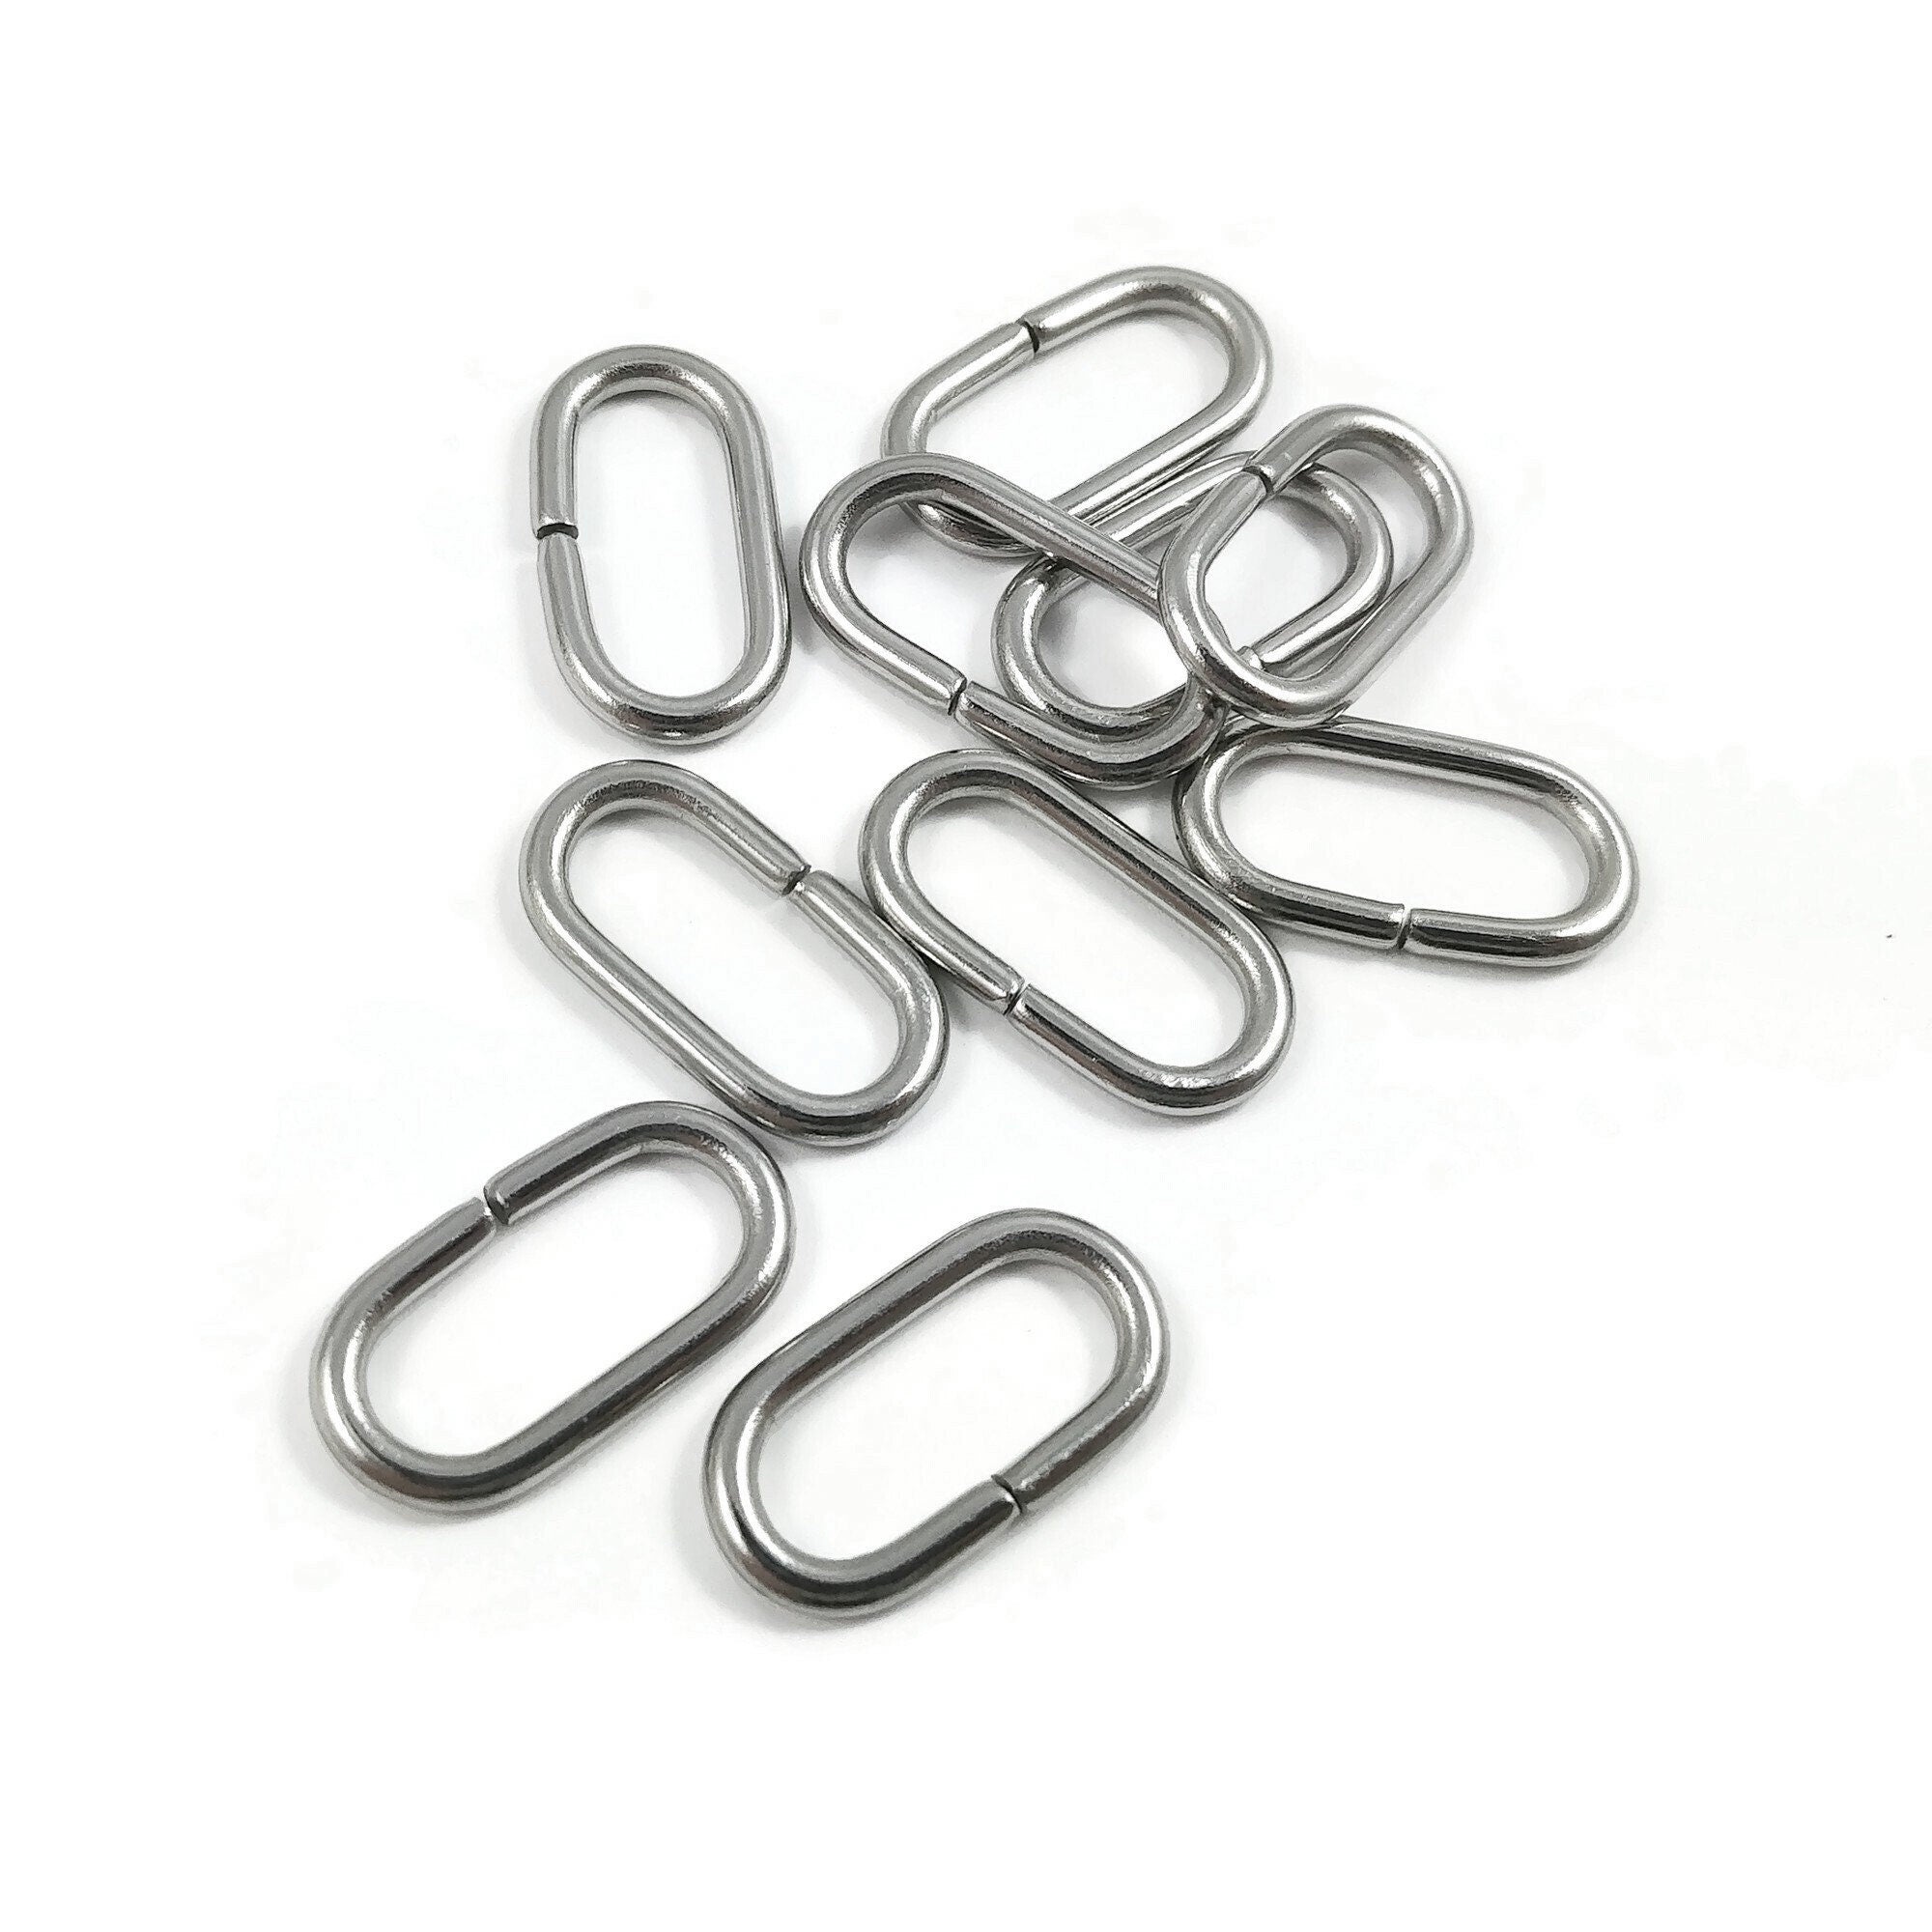 200 Gold Plated Open Jump Rings, 6mm, Thickness 1mm, Jewelry Making  Supplies, Jump Rings 1342 